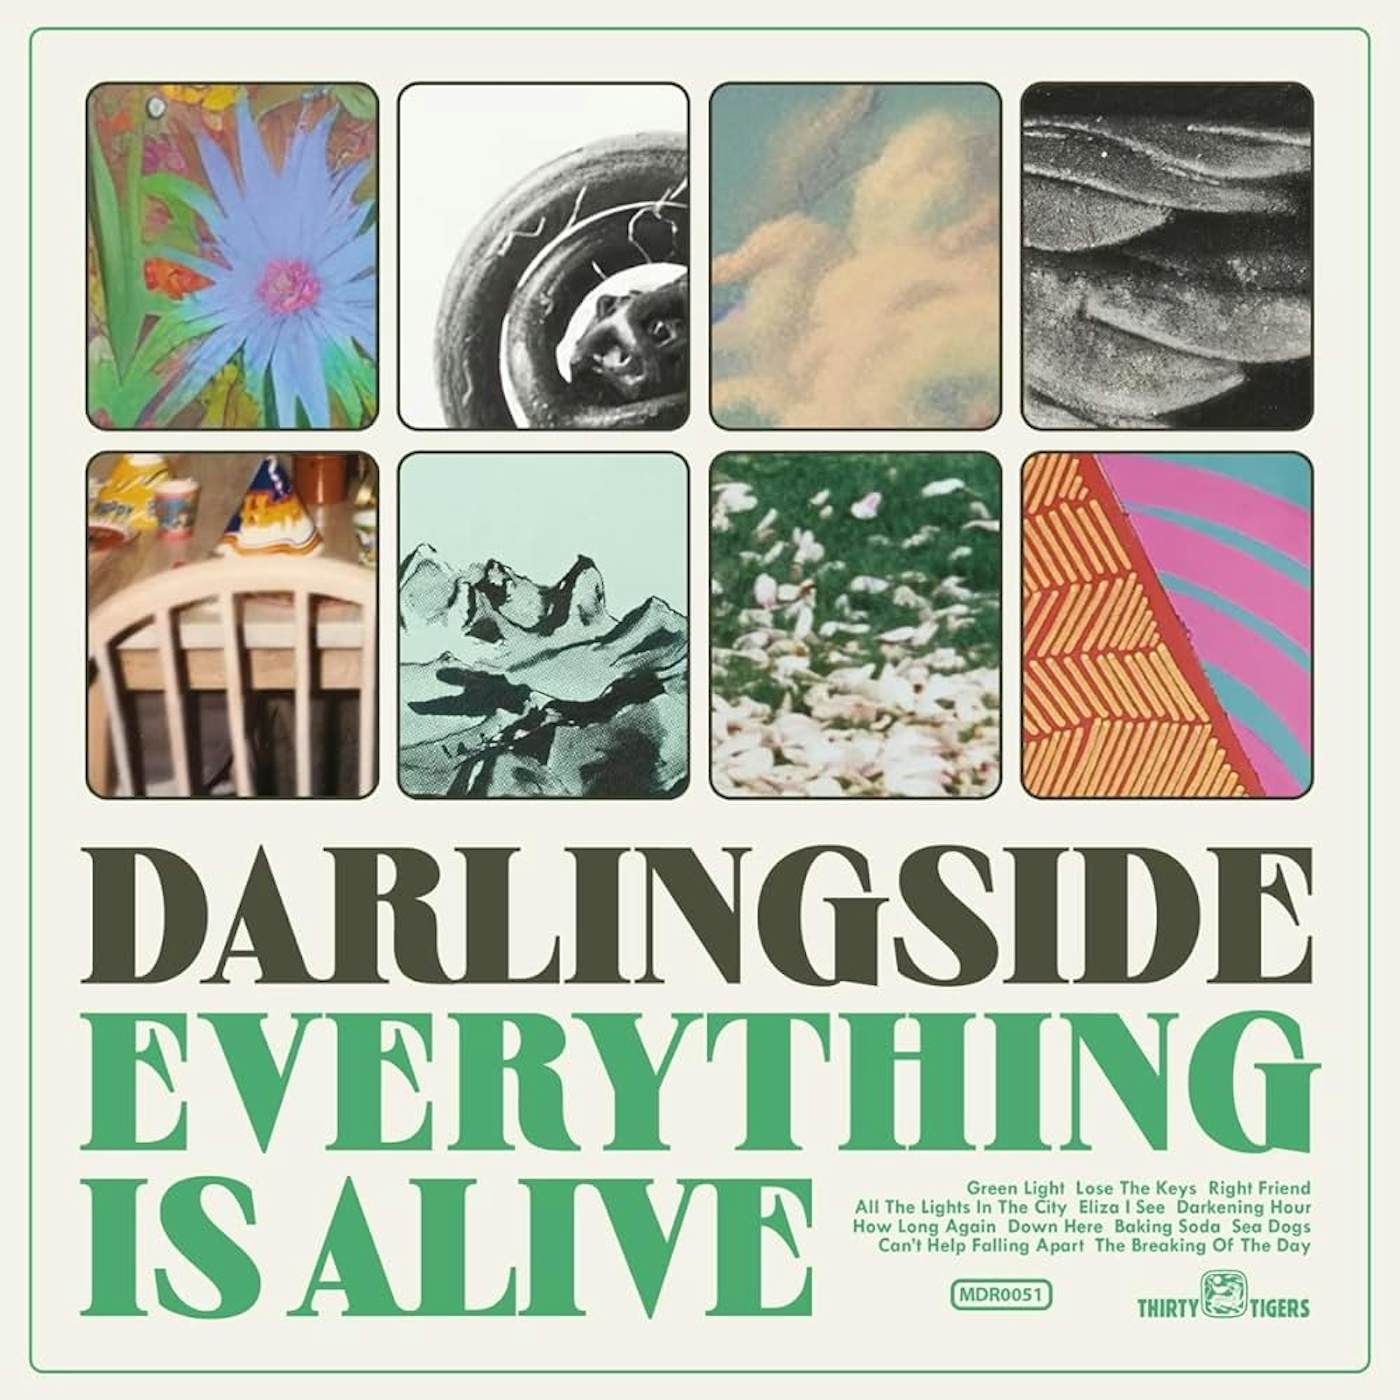 Darlingside EVERYTHING IS ALIVE Vinyl Record